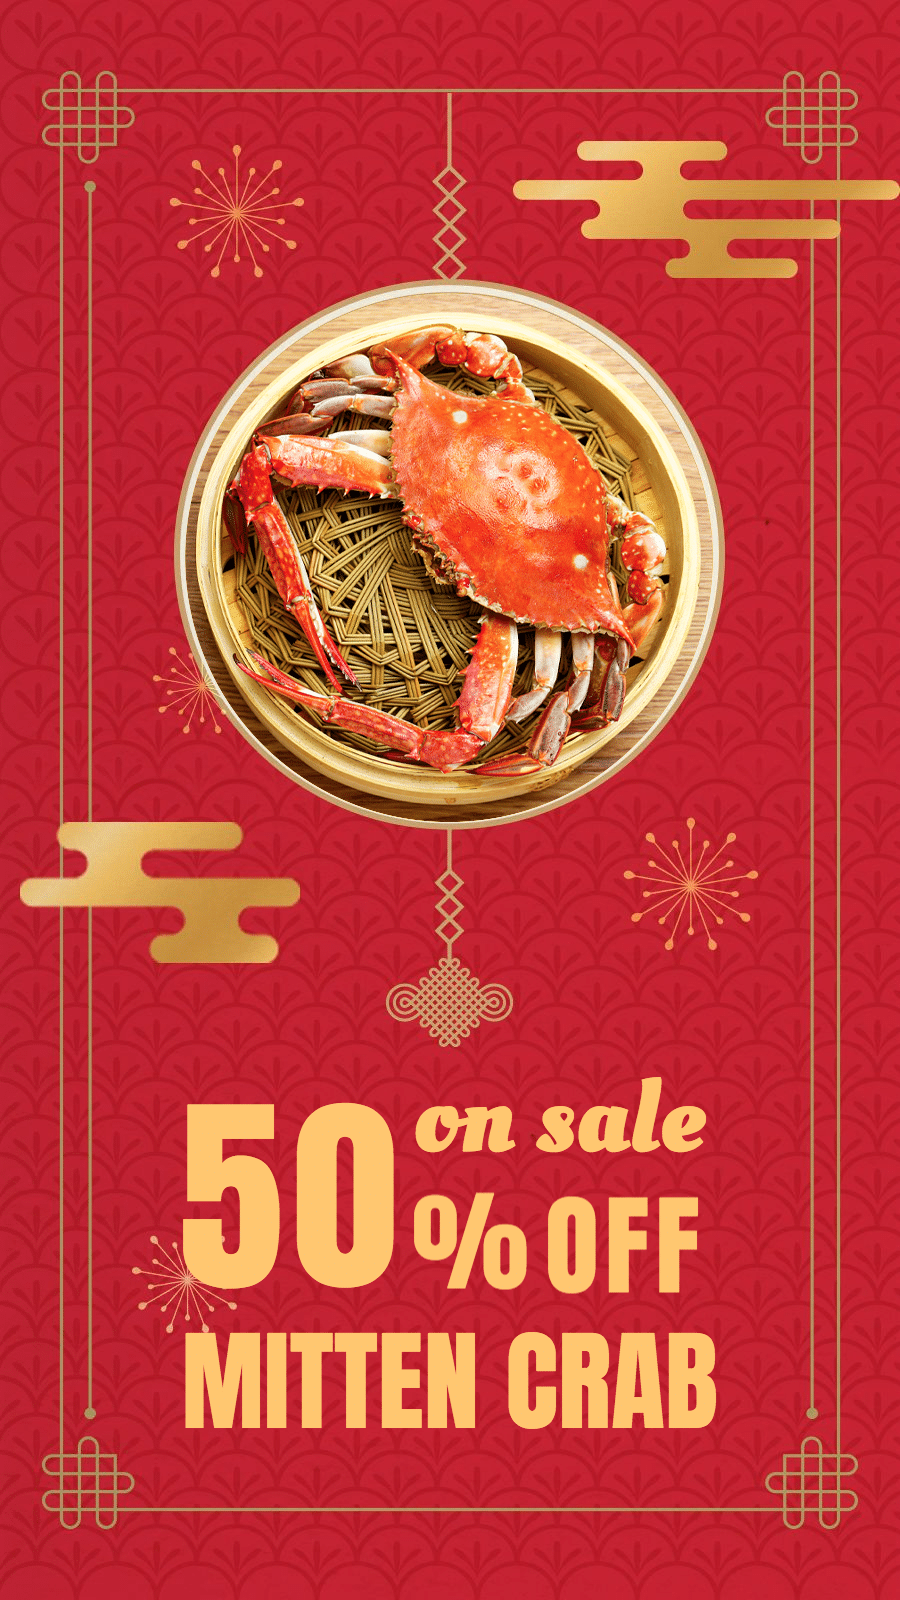 Creative Chinese Food Discount Promo Instagram Story预览效果